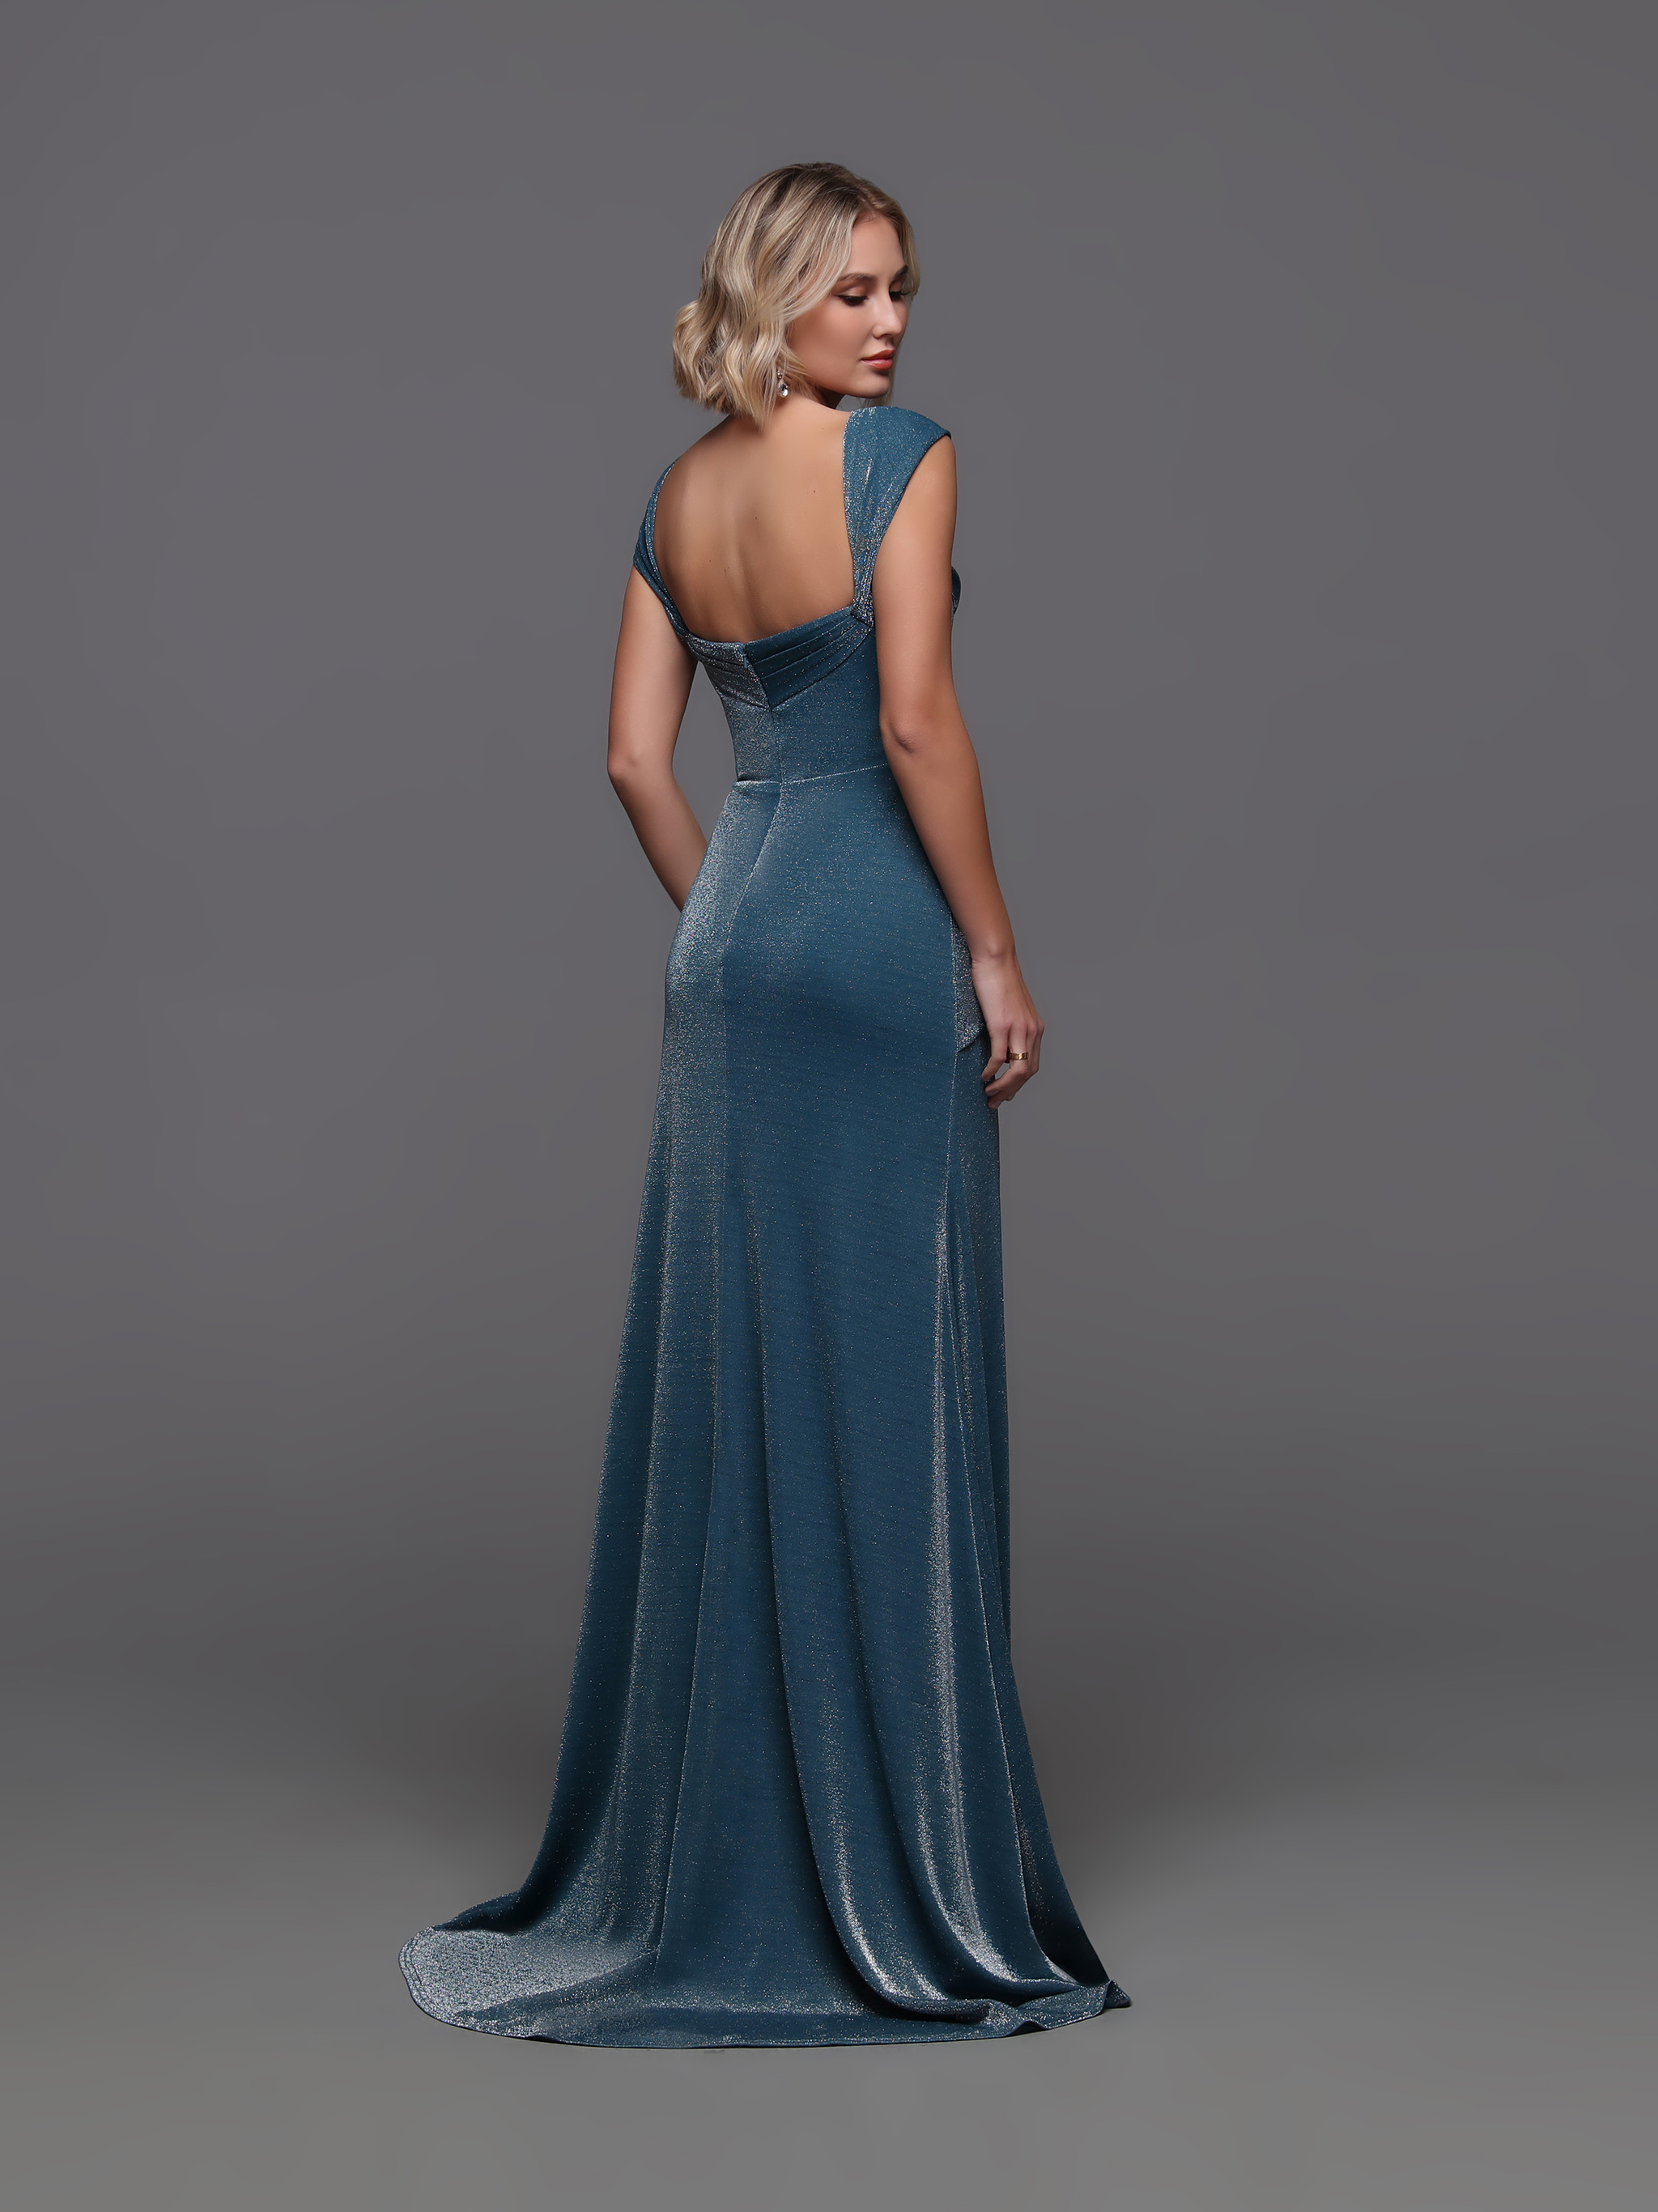 Image showing back view of style #60683